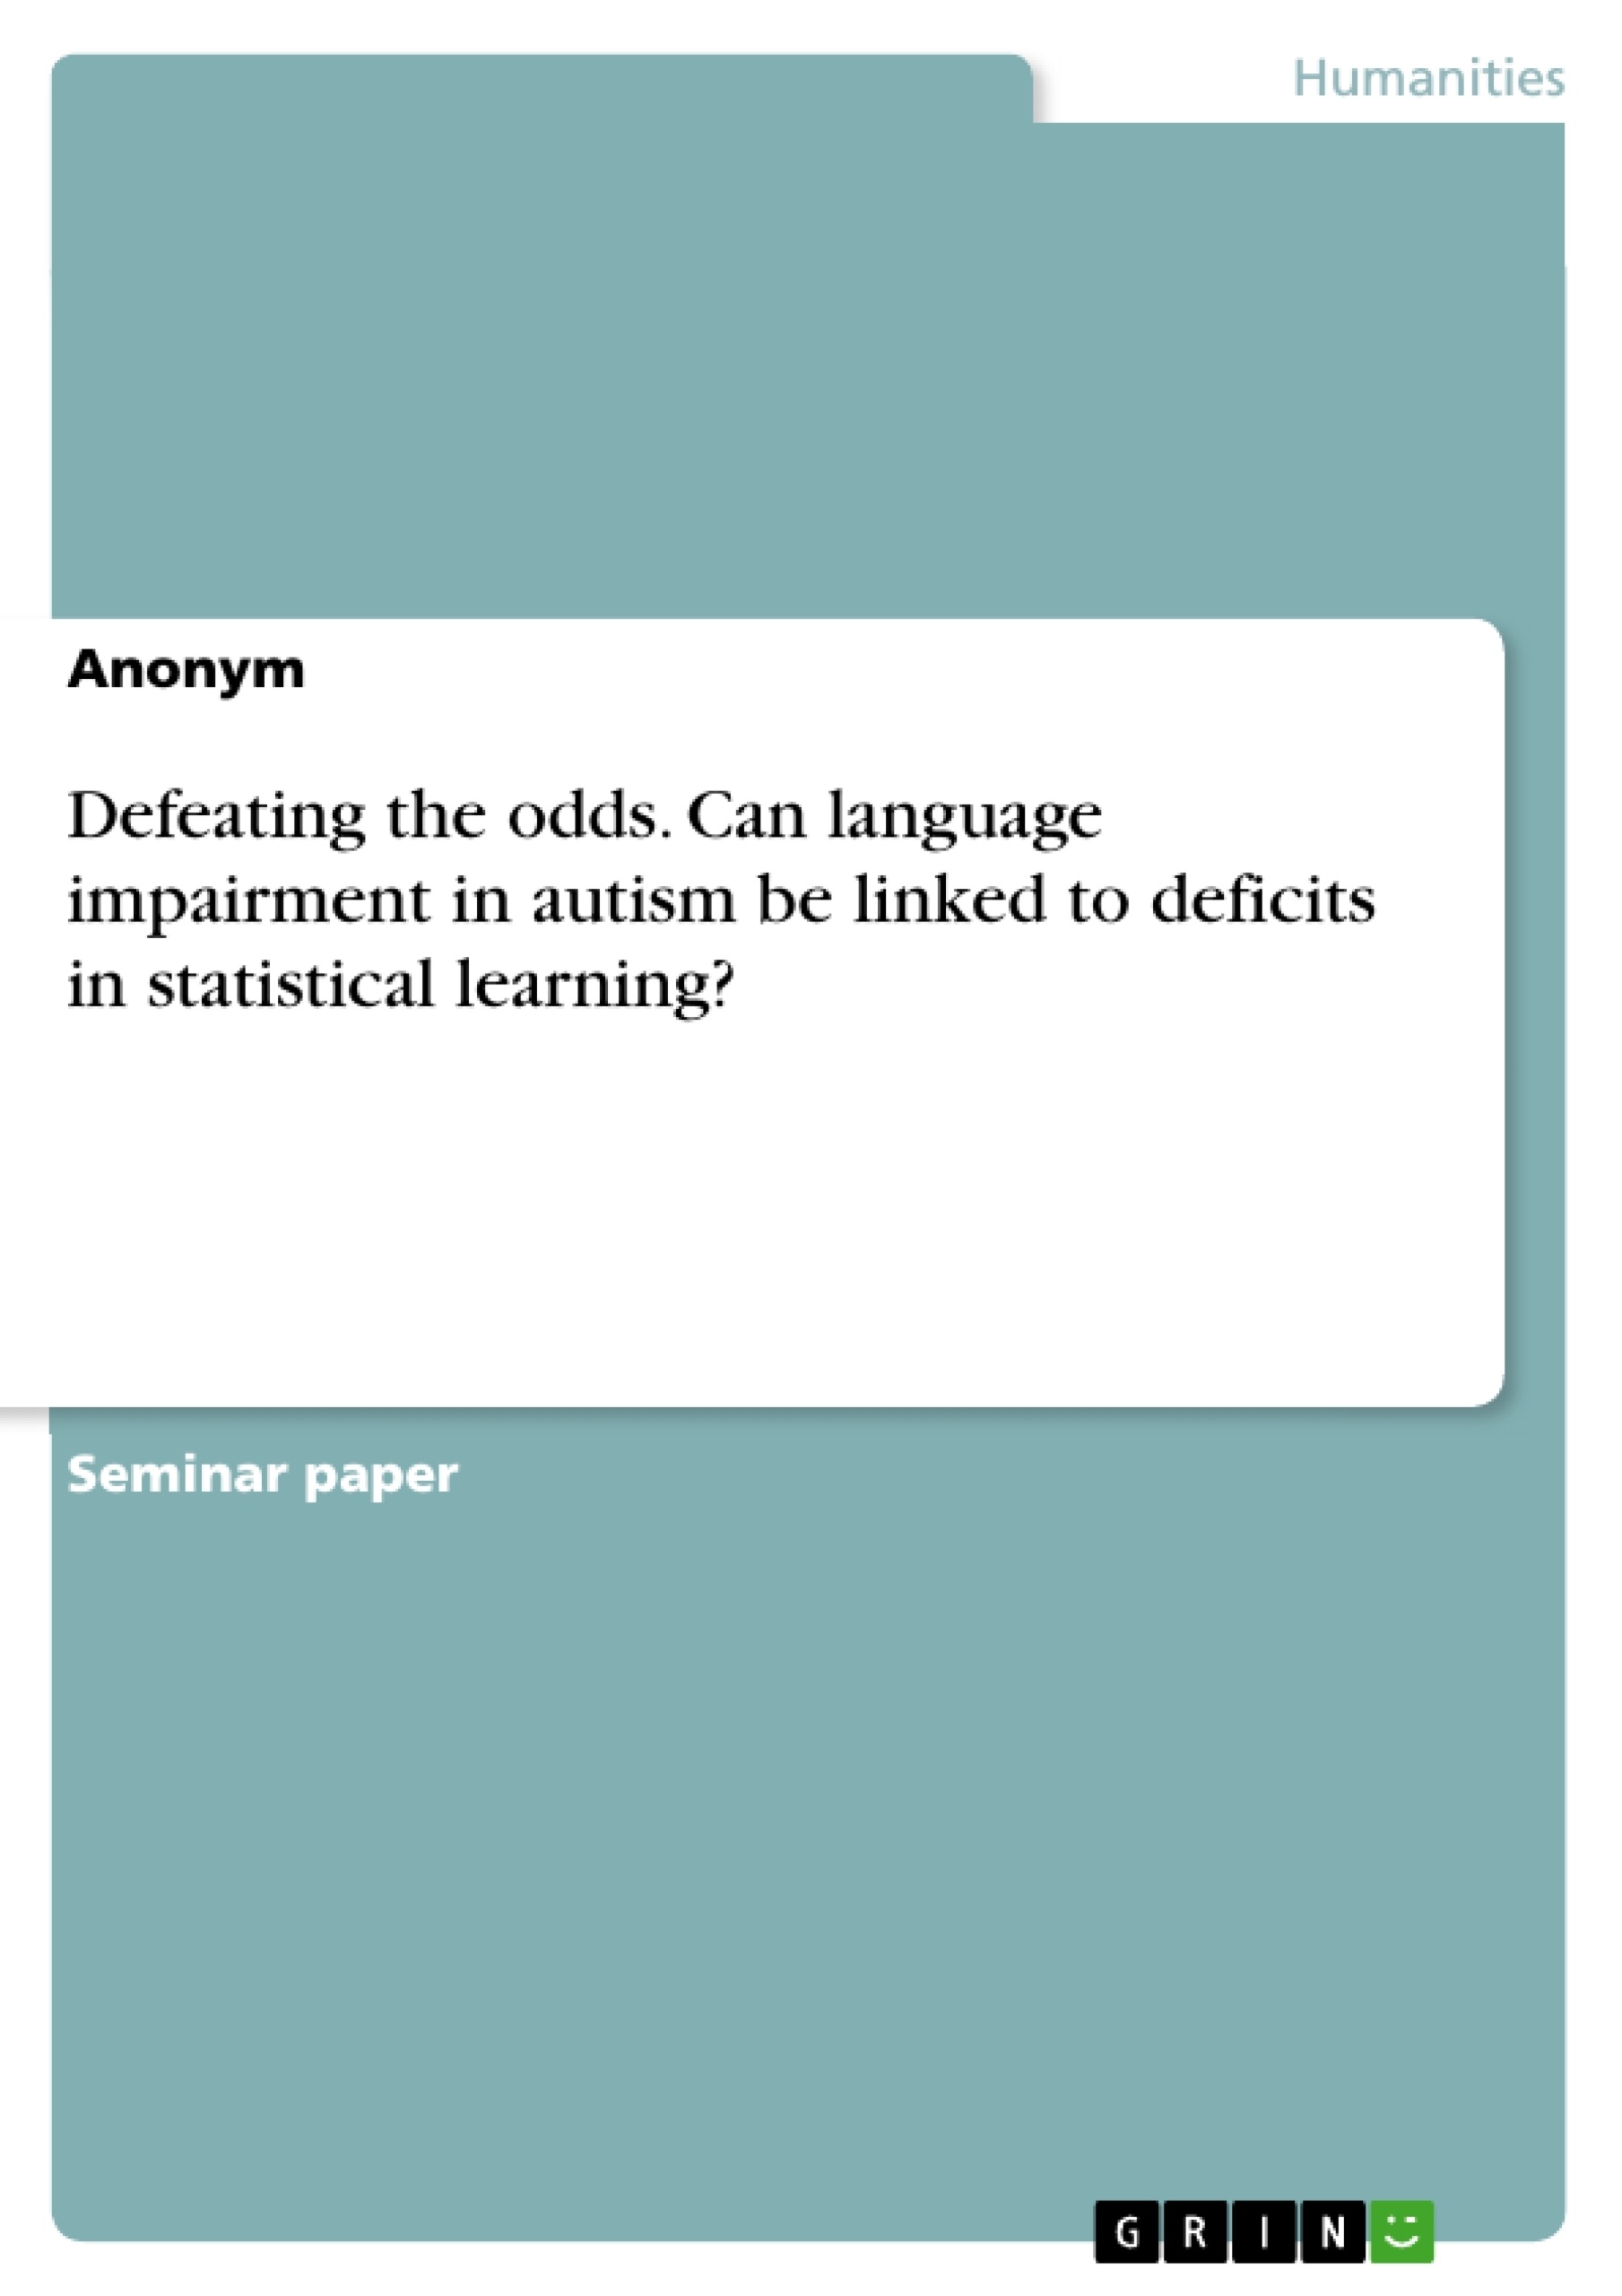 Title: Defeating the odds. Can language impairment in autism be linked to deficits in statistical learning?